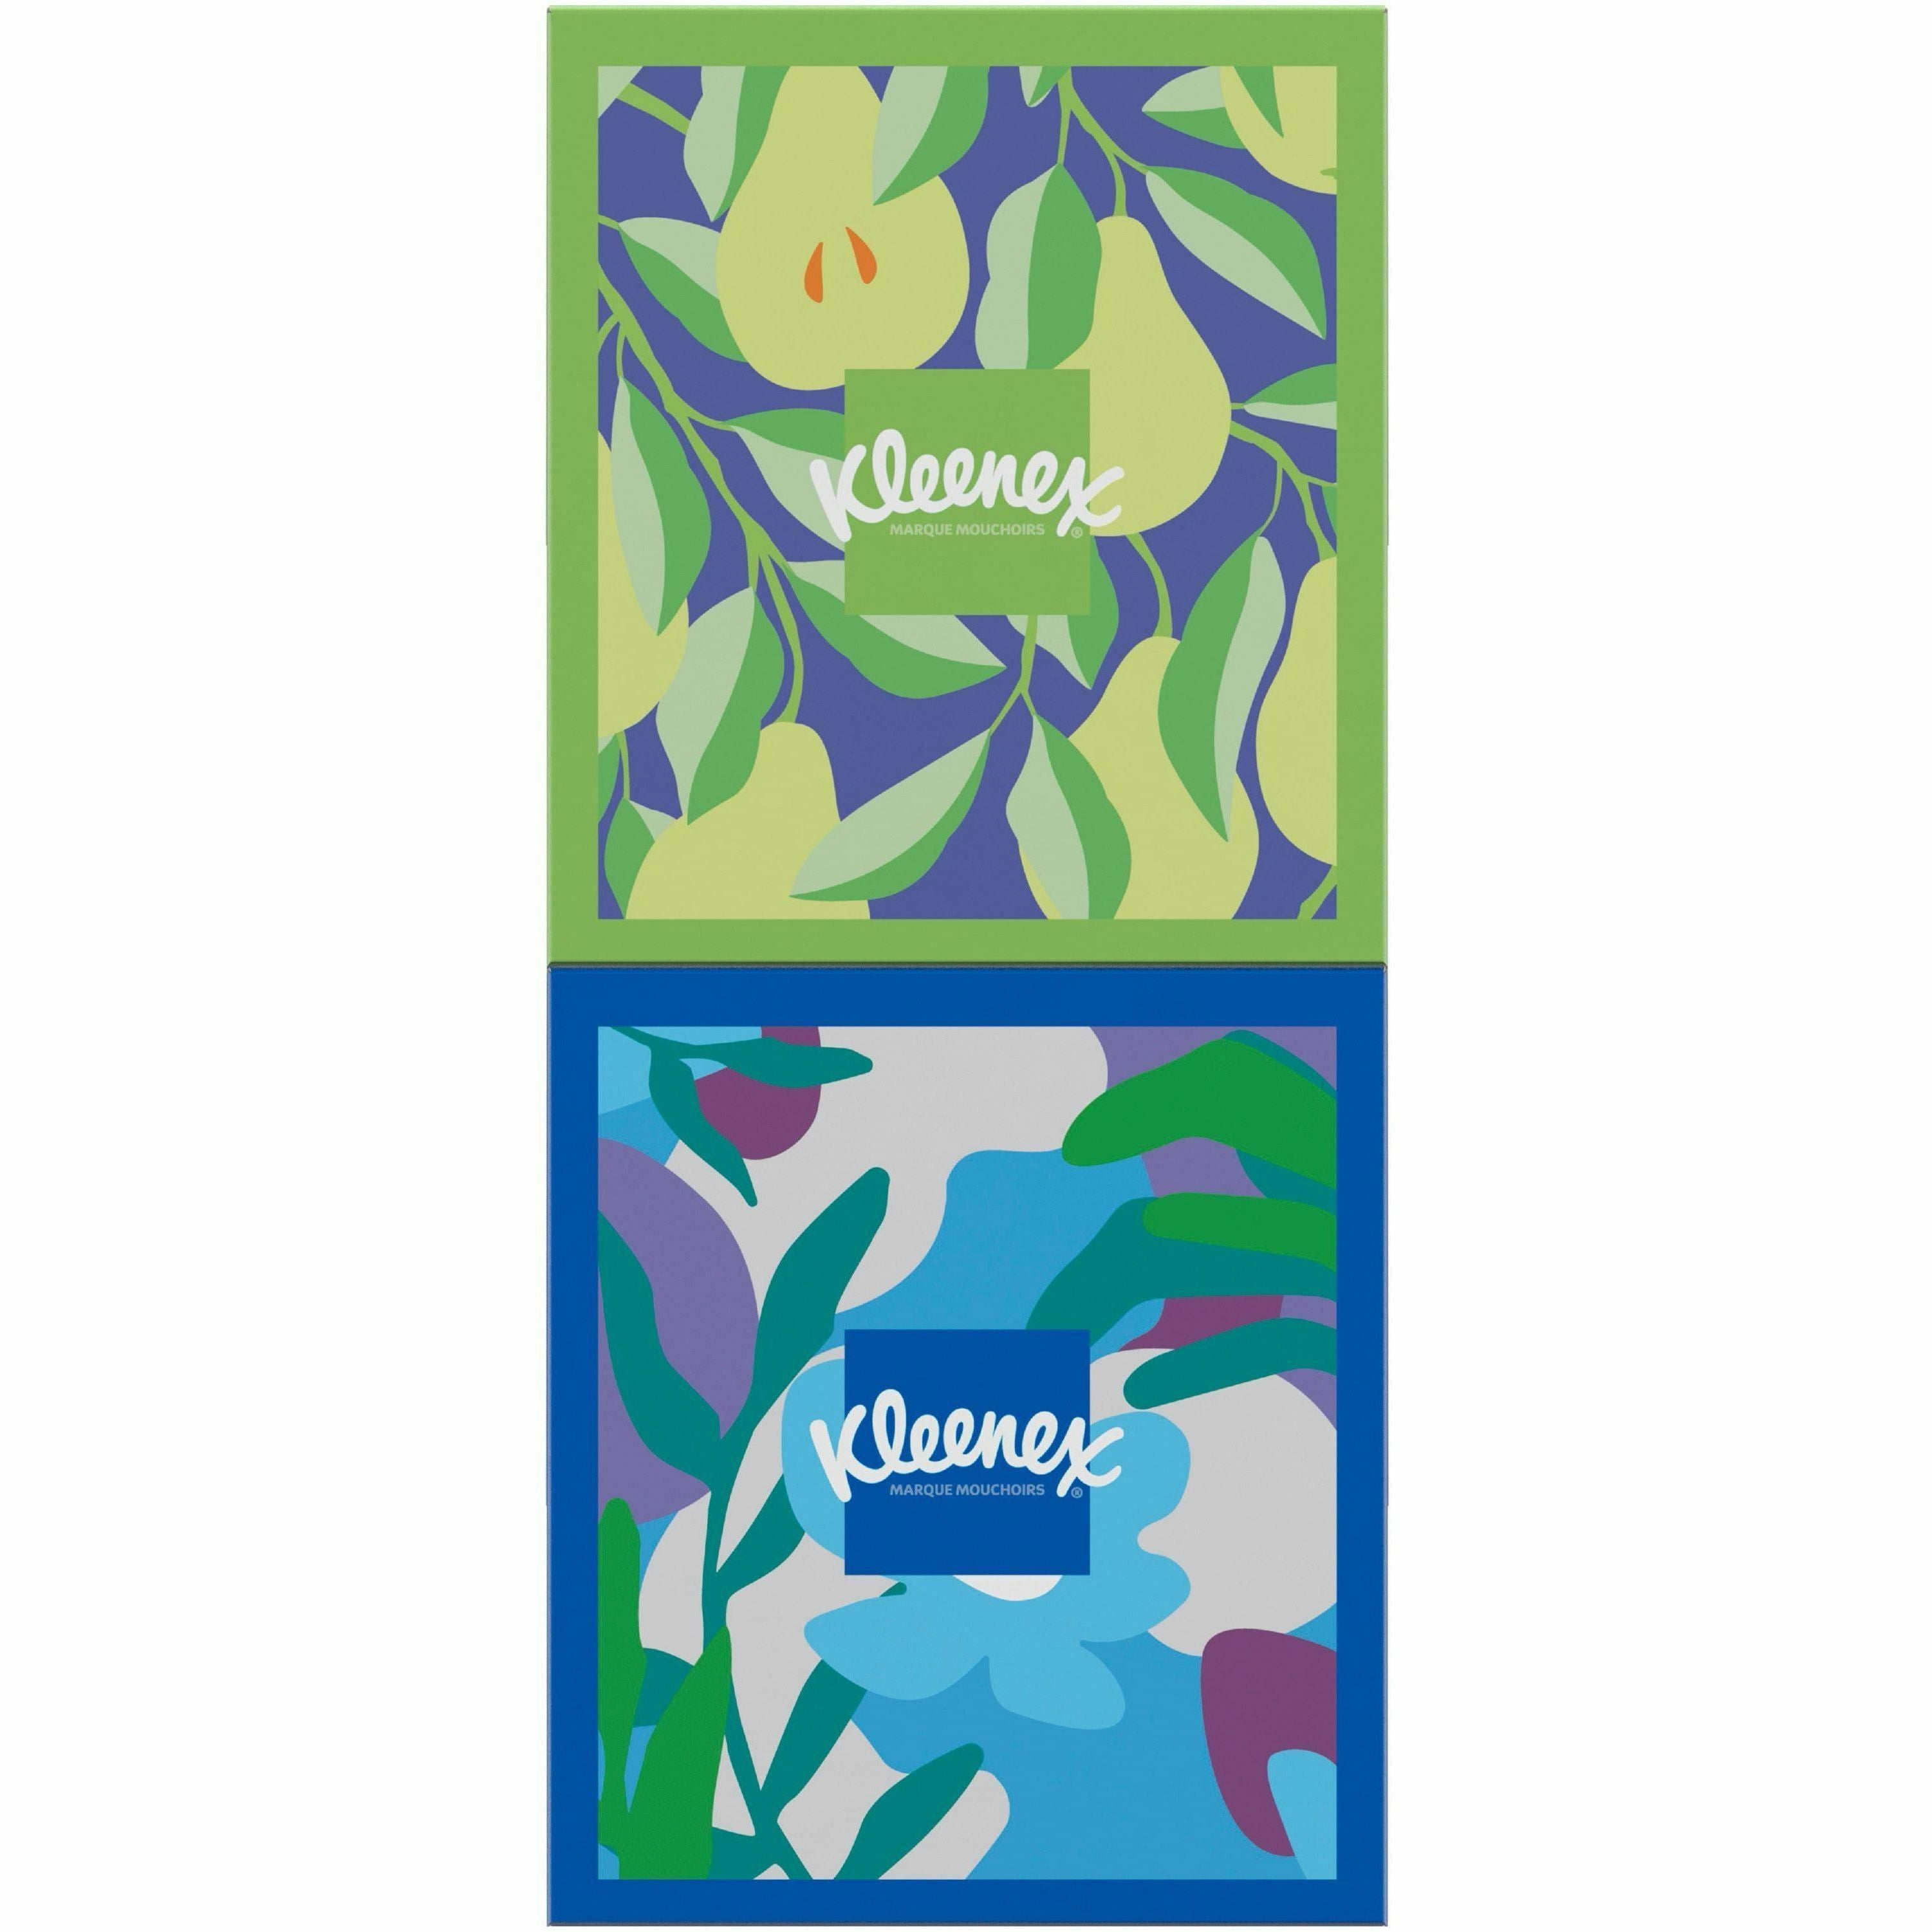 kleenex-trusted-care-tissues-2-ply-820-x-840-white-soft-strong-absorbent-durable-for-home-office-school-70-per-box-12-carton_kcc50184ct - 5